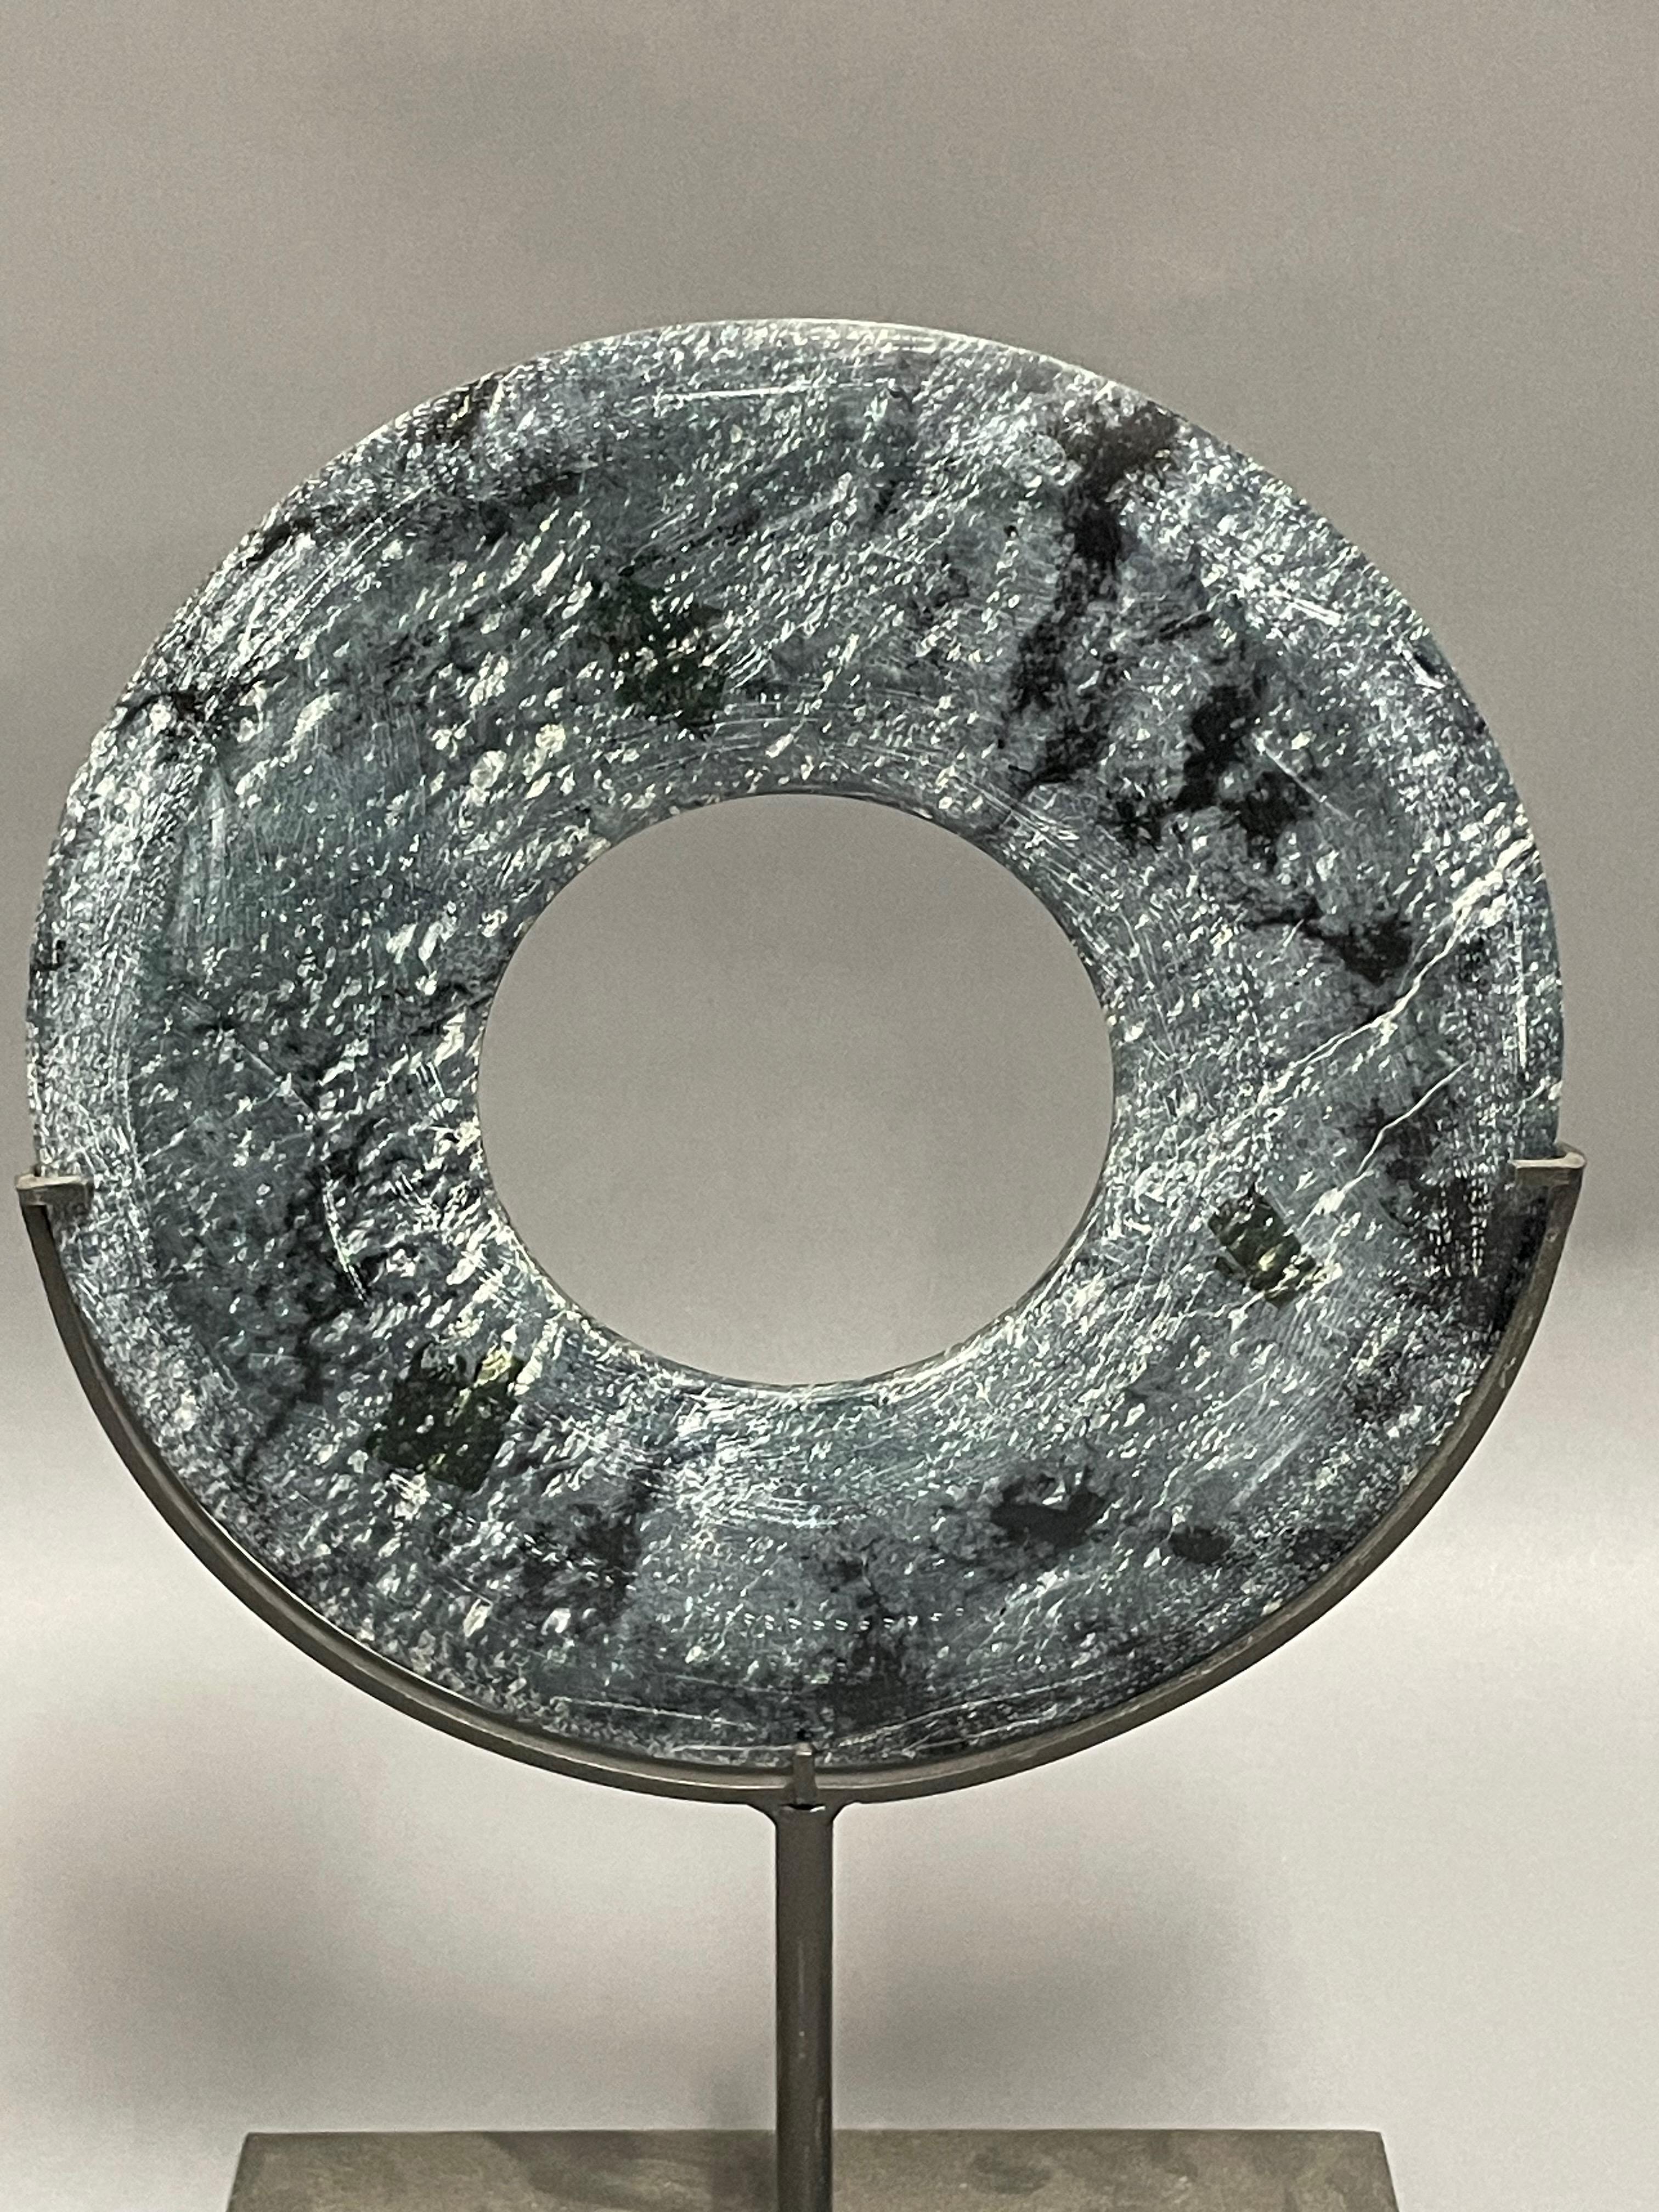 Chinois Blue, Grey, Black Set of Two Jade Disc Sculptures on Stands, China, Contemporary en vente